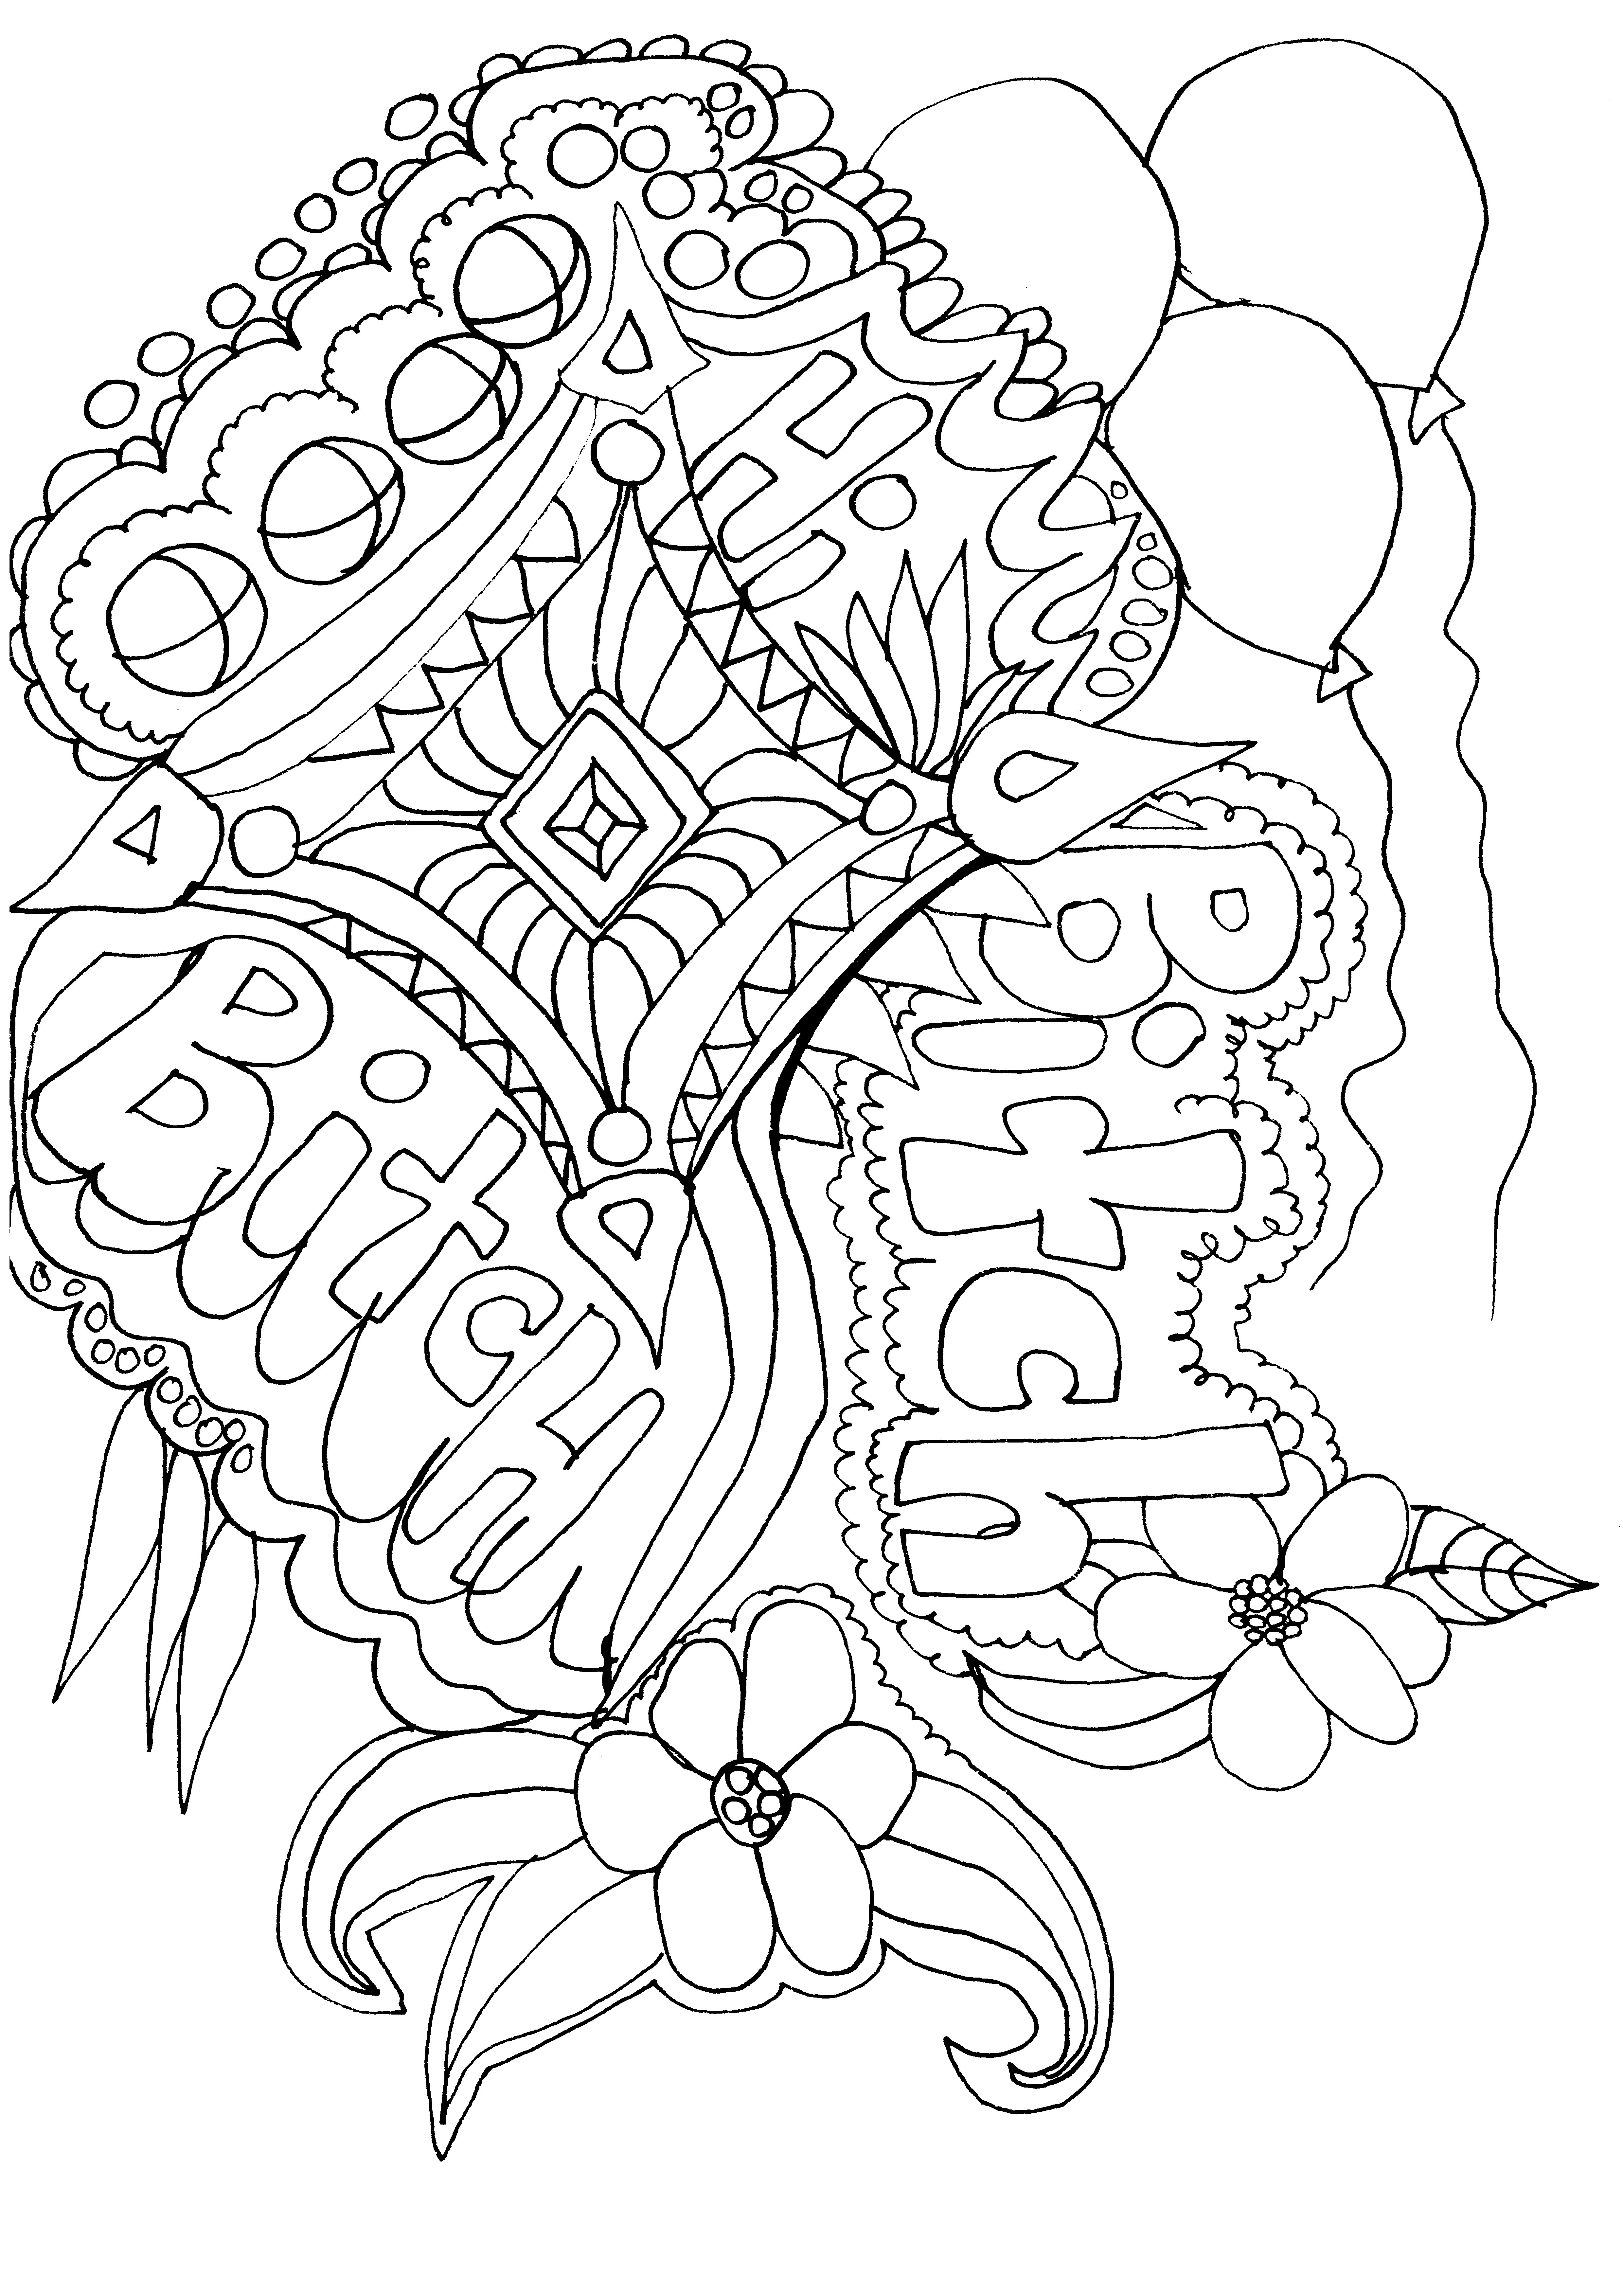 pin-on-everything-adult-coloring